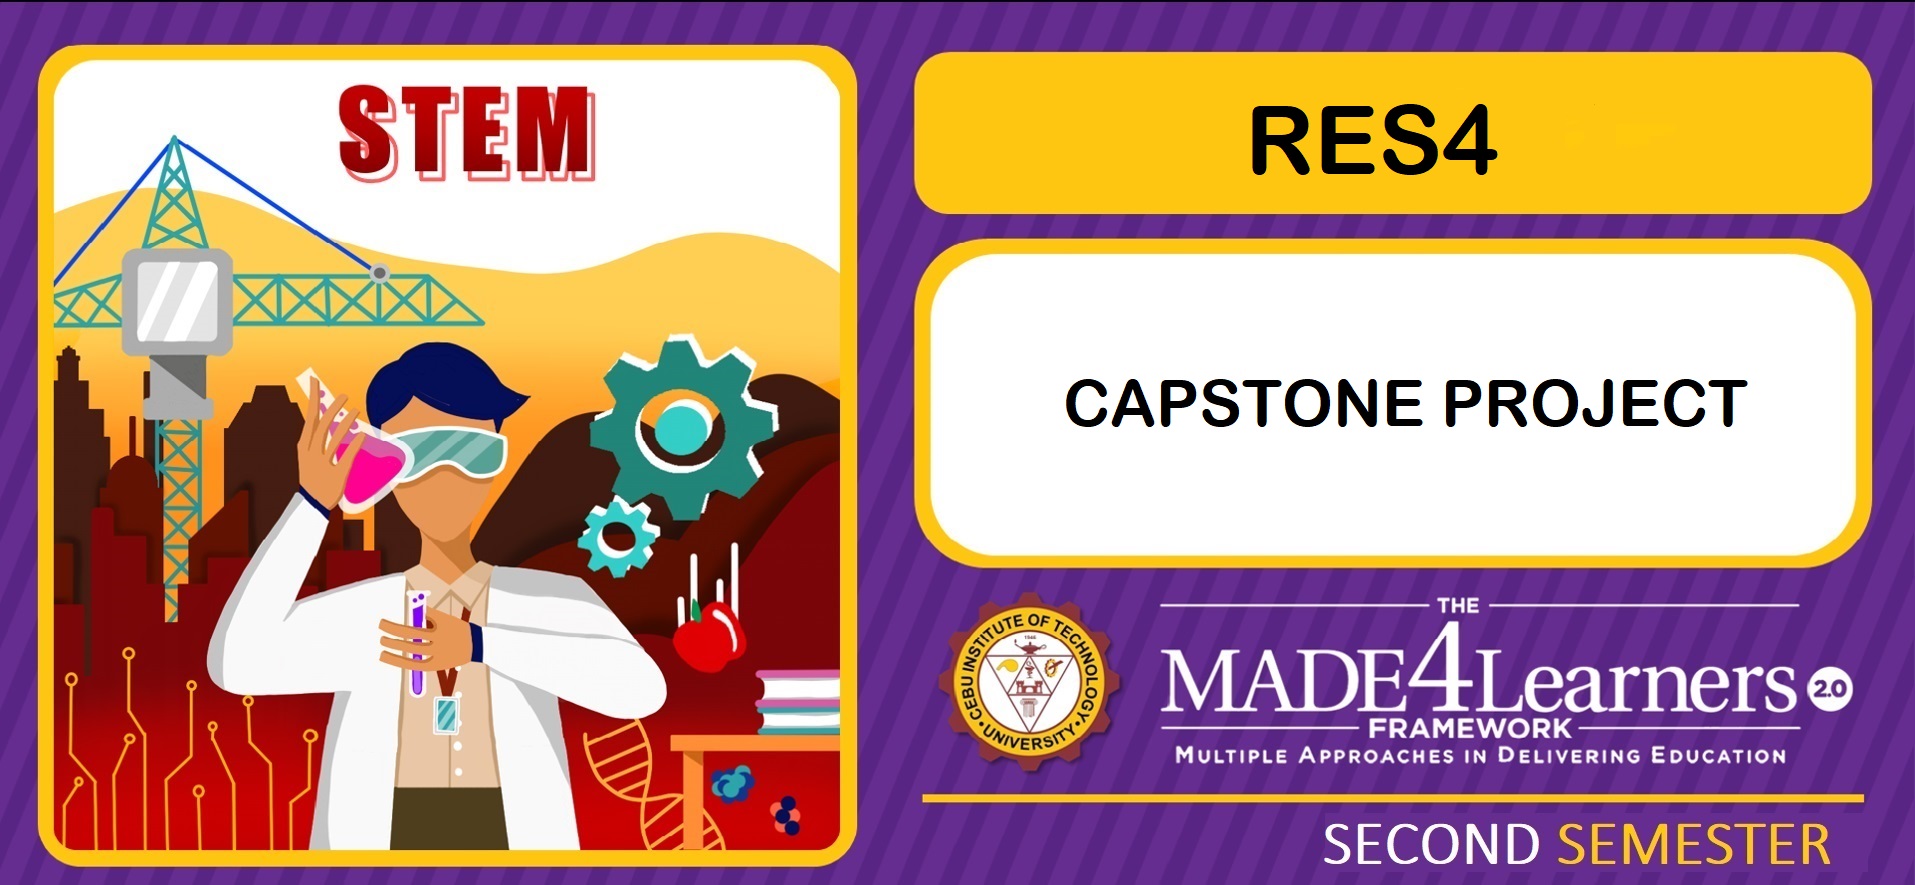 RES4: Capstone Project (Alesna)